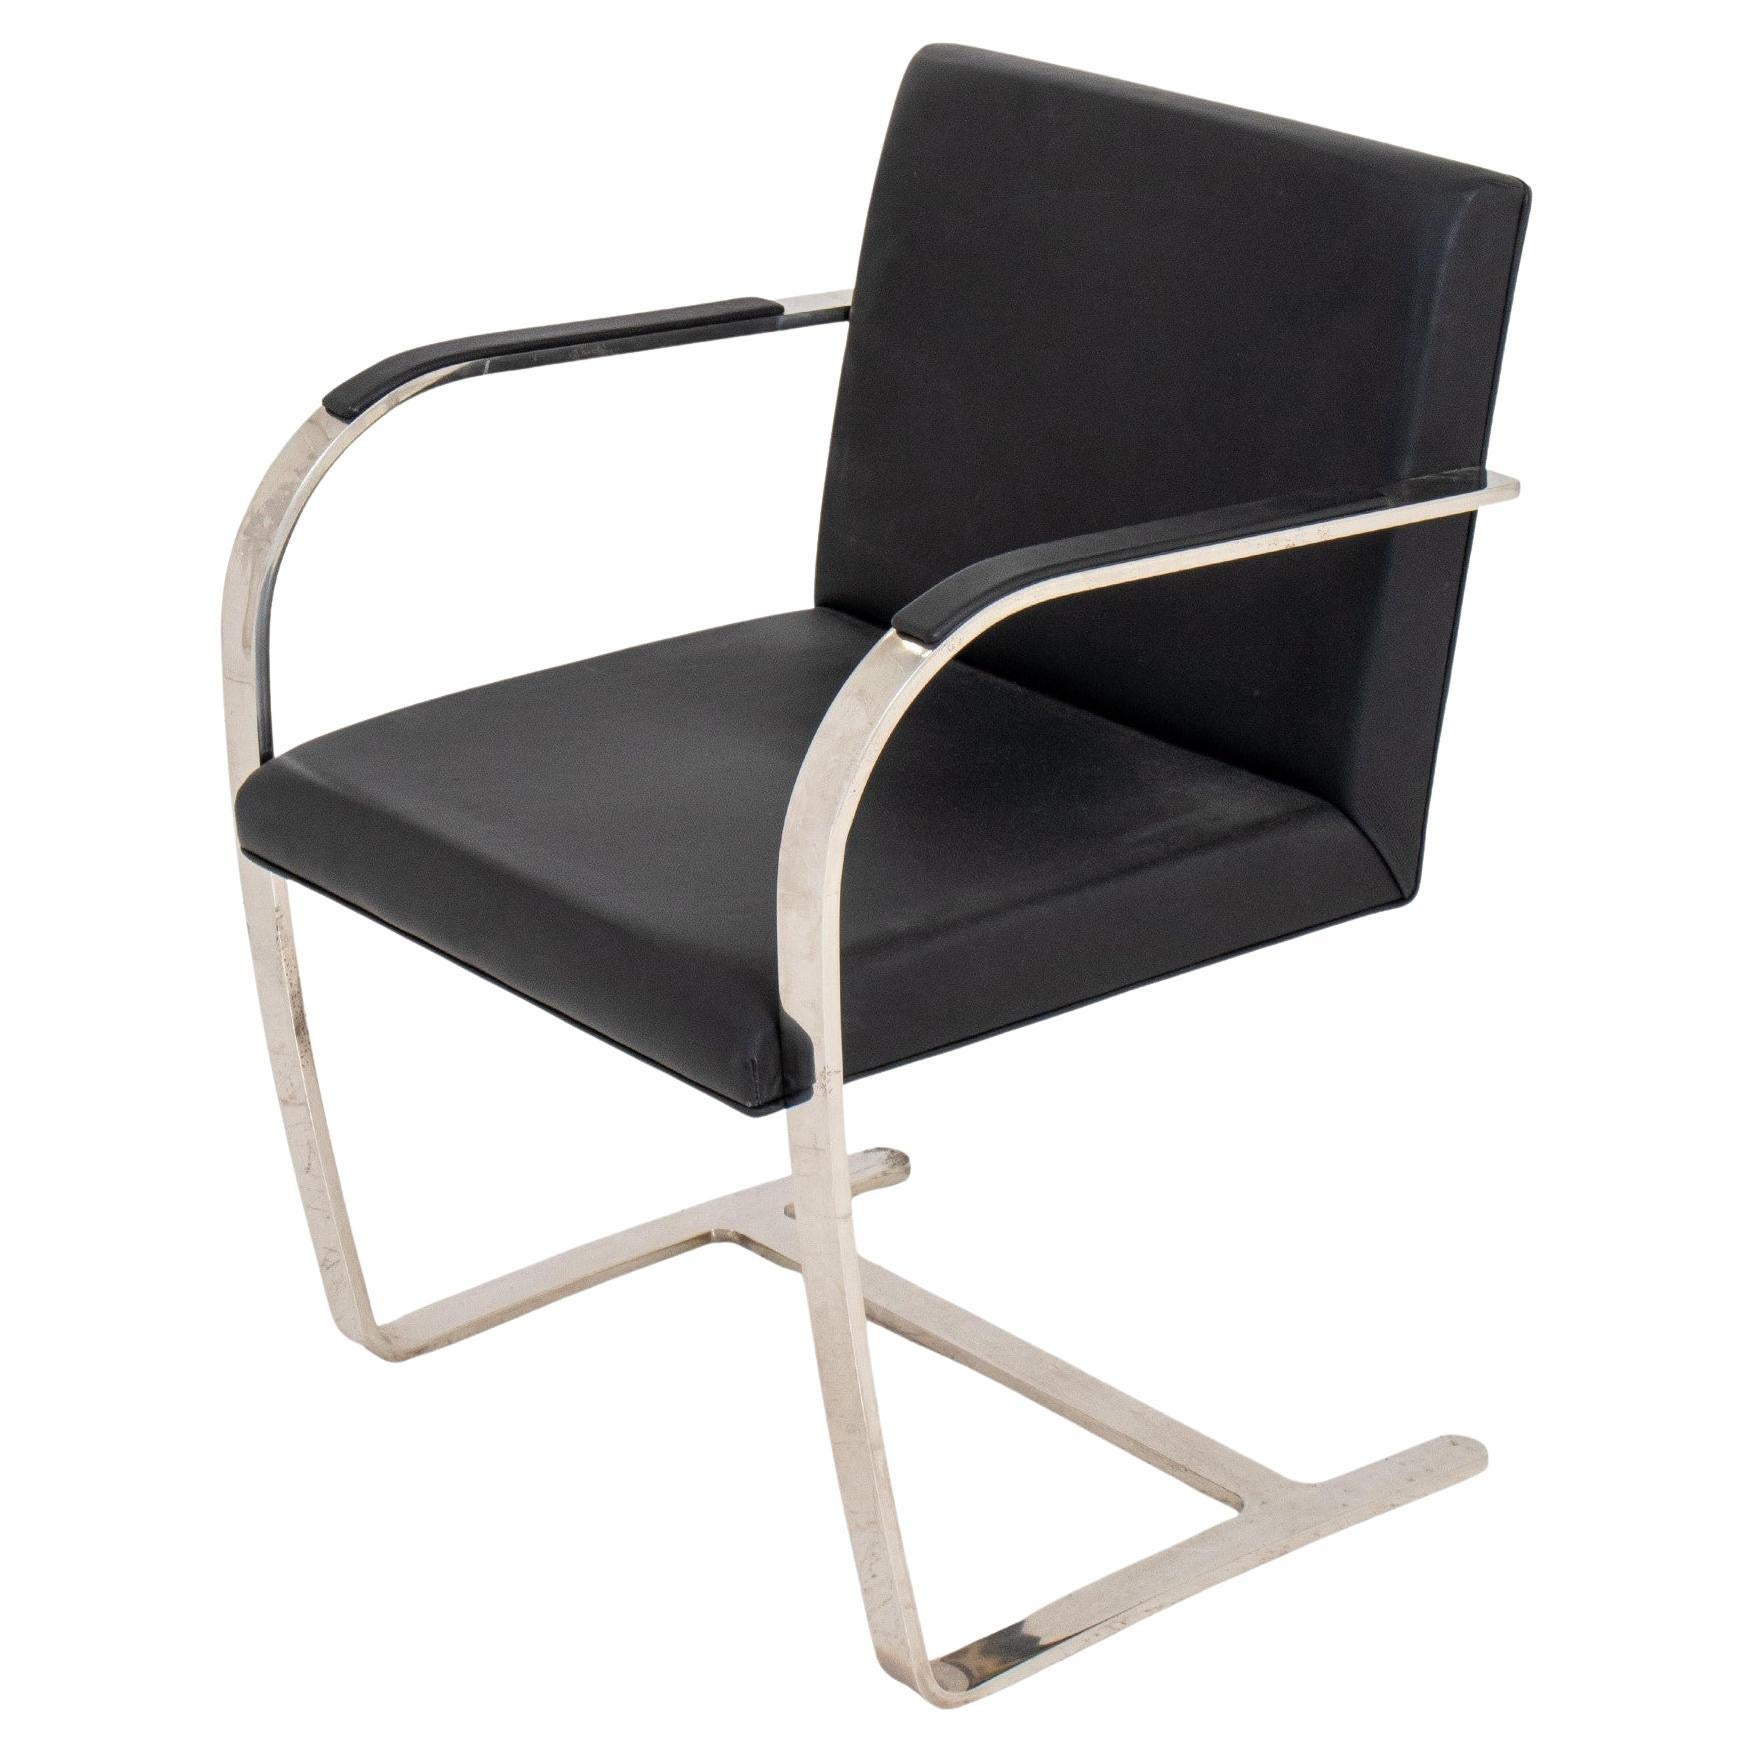 Mies van der Rohe "Brno" Chair For Sale